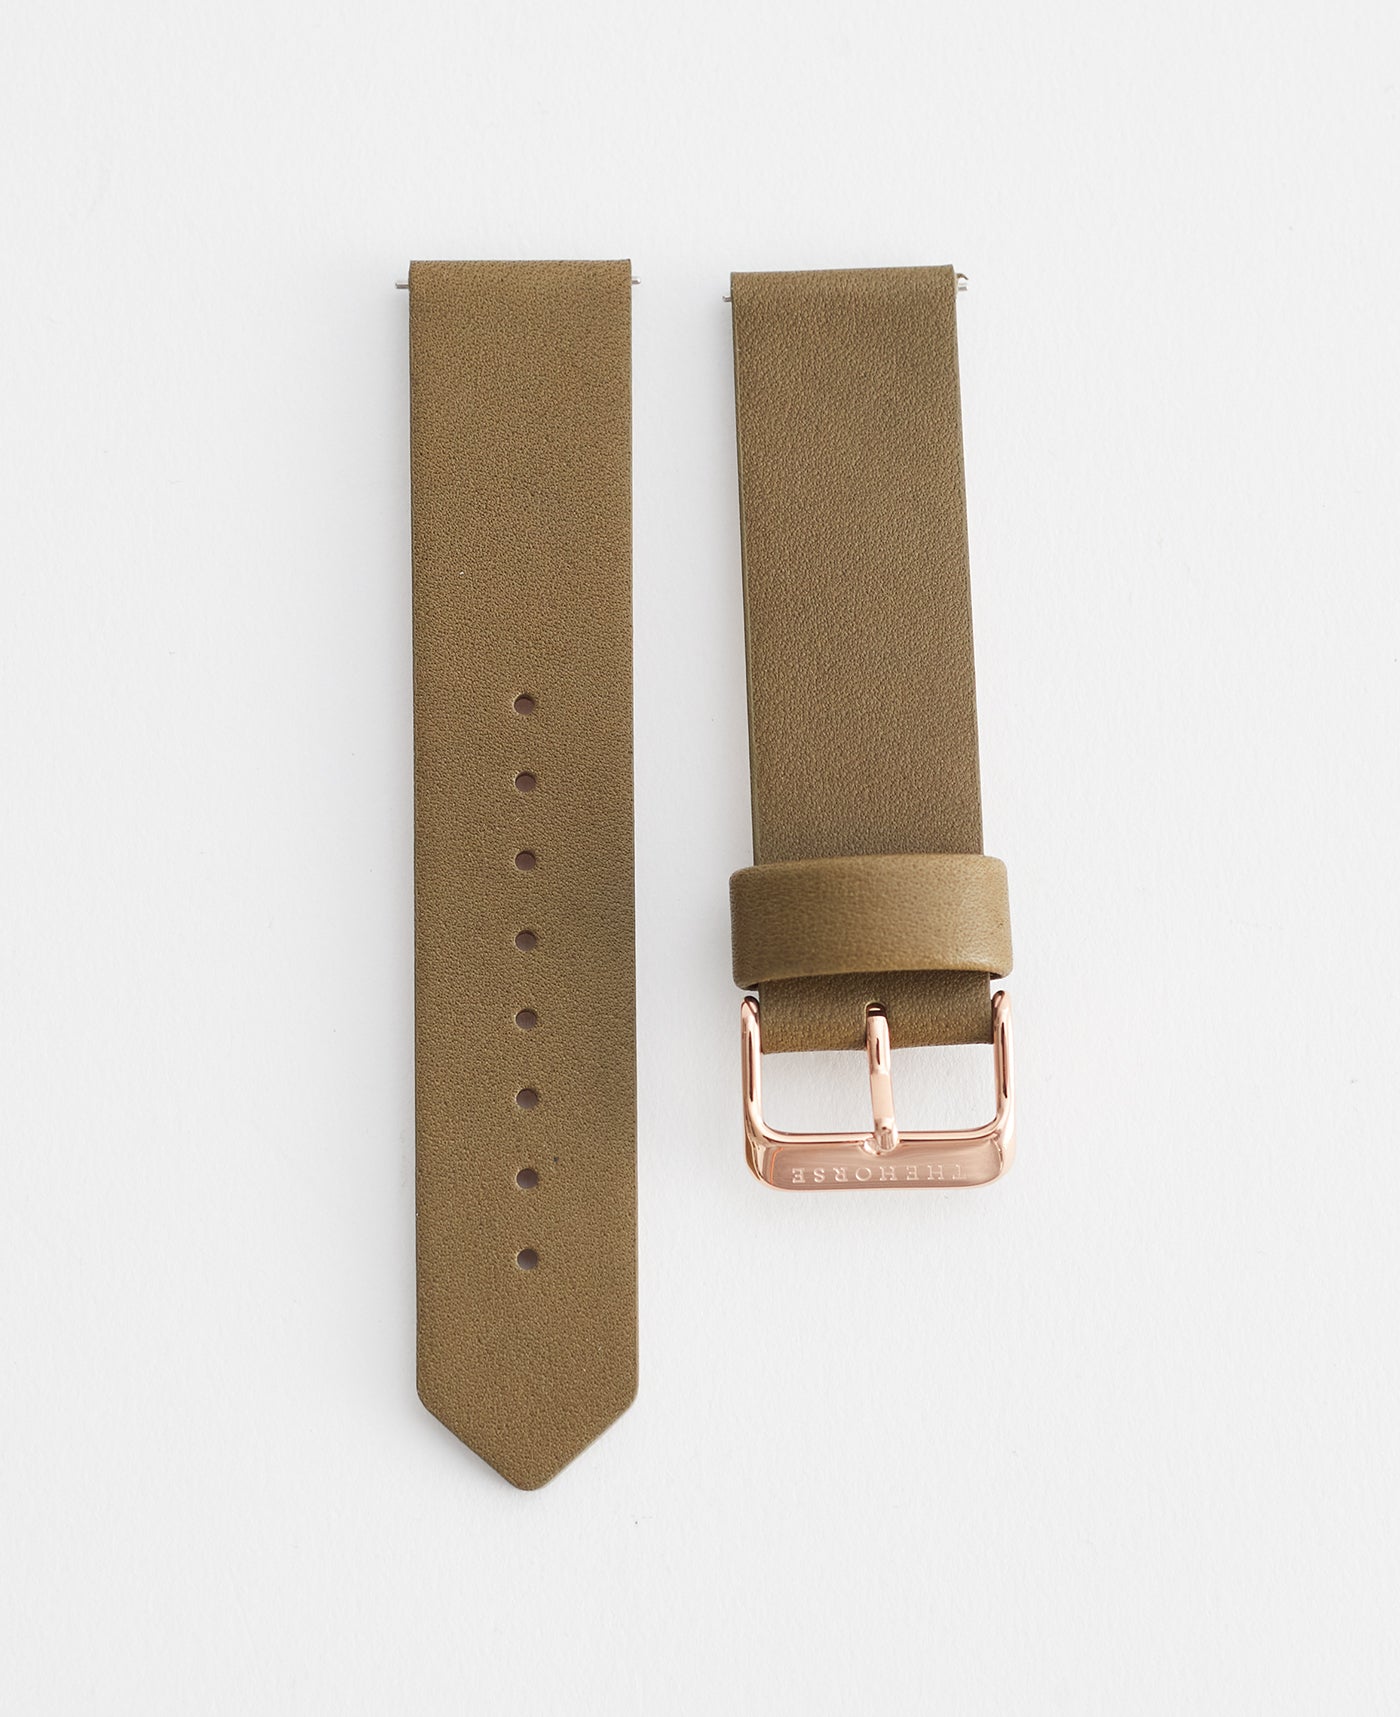 The 20mm Original Watch with Olive Leather Strap by The Horse®